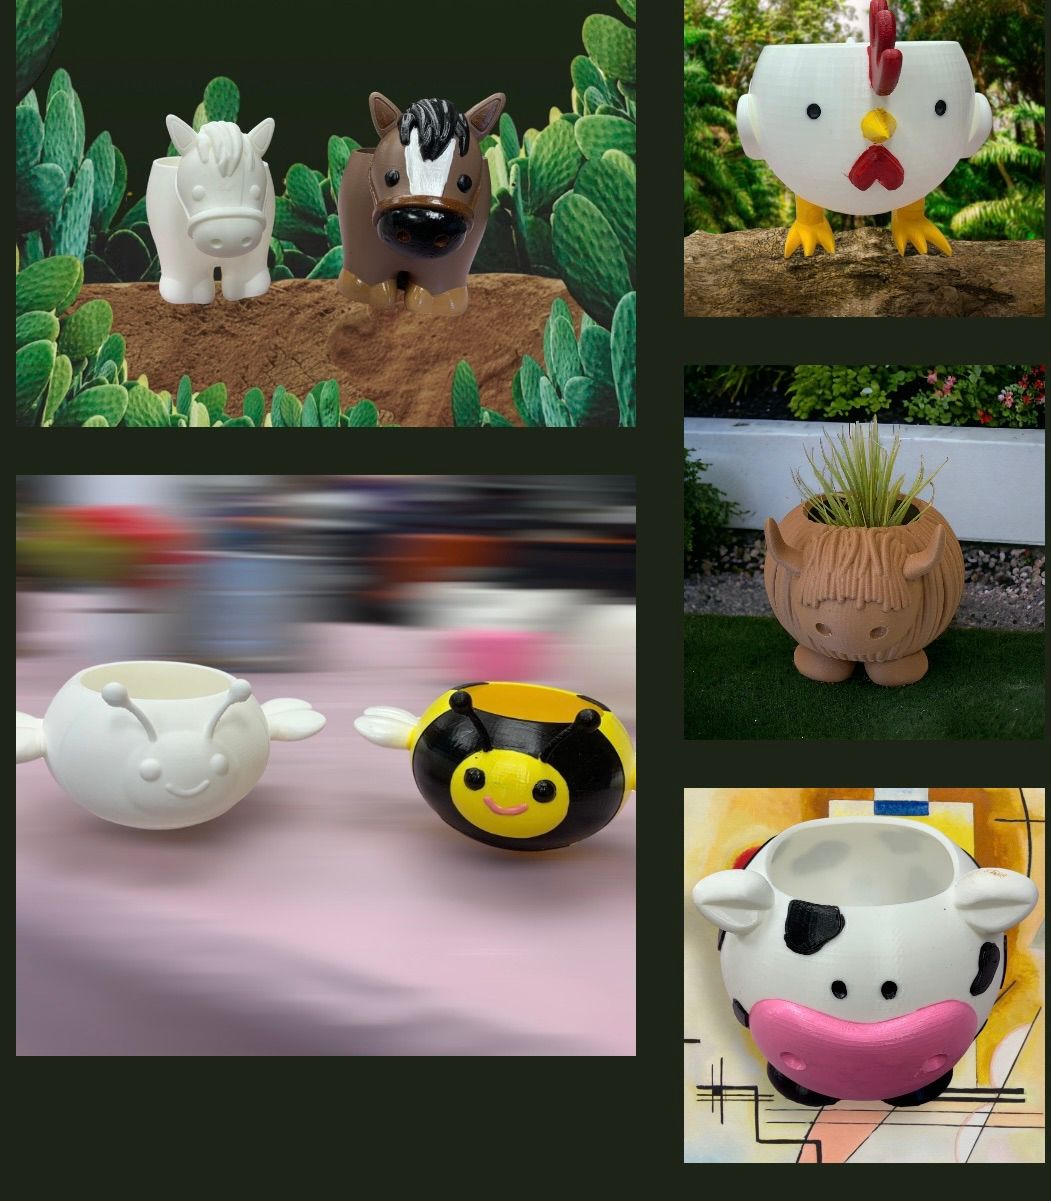 Farm-tastic Fun: Paint Your Way with Animal Planters Workshop!